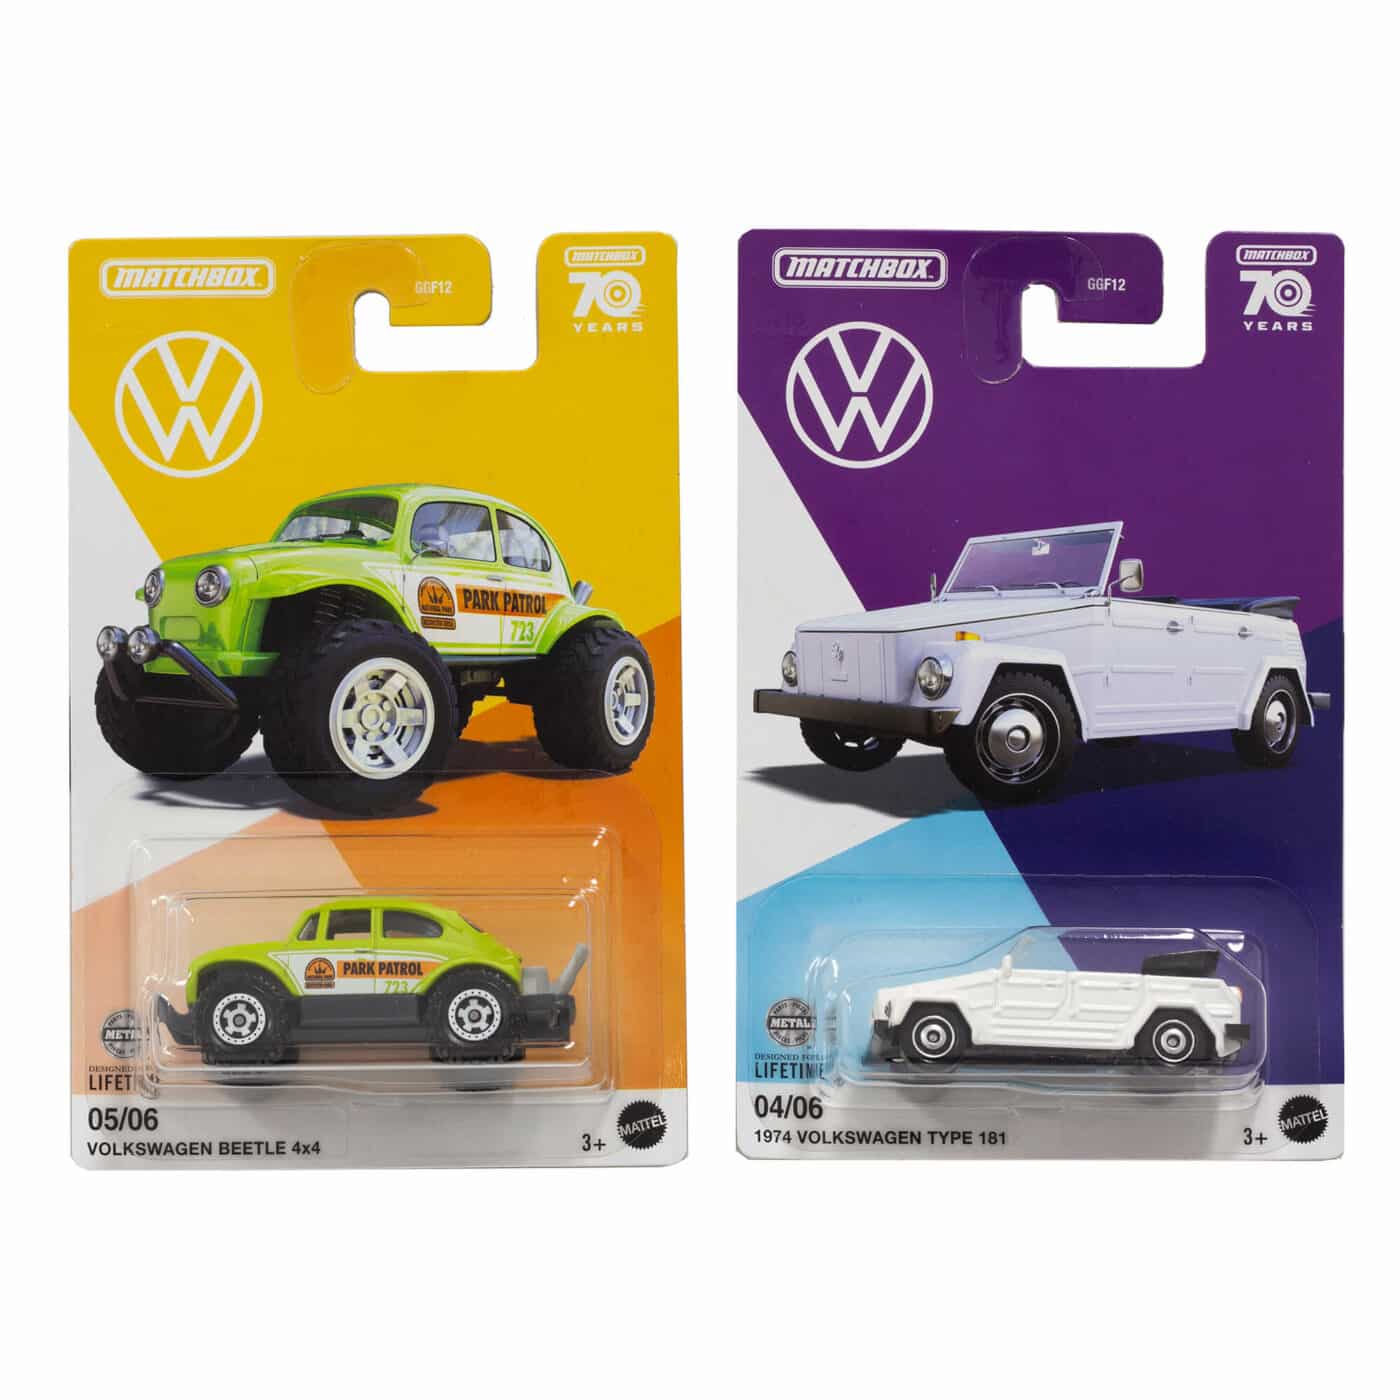 Matchbox 70 Years Volkswagen Collection of 2 Vehicle